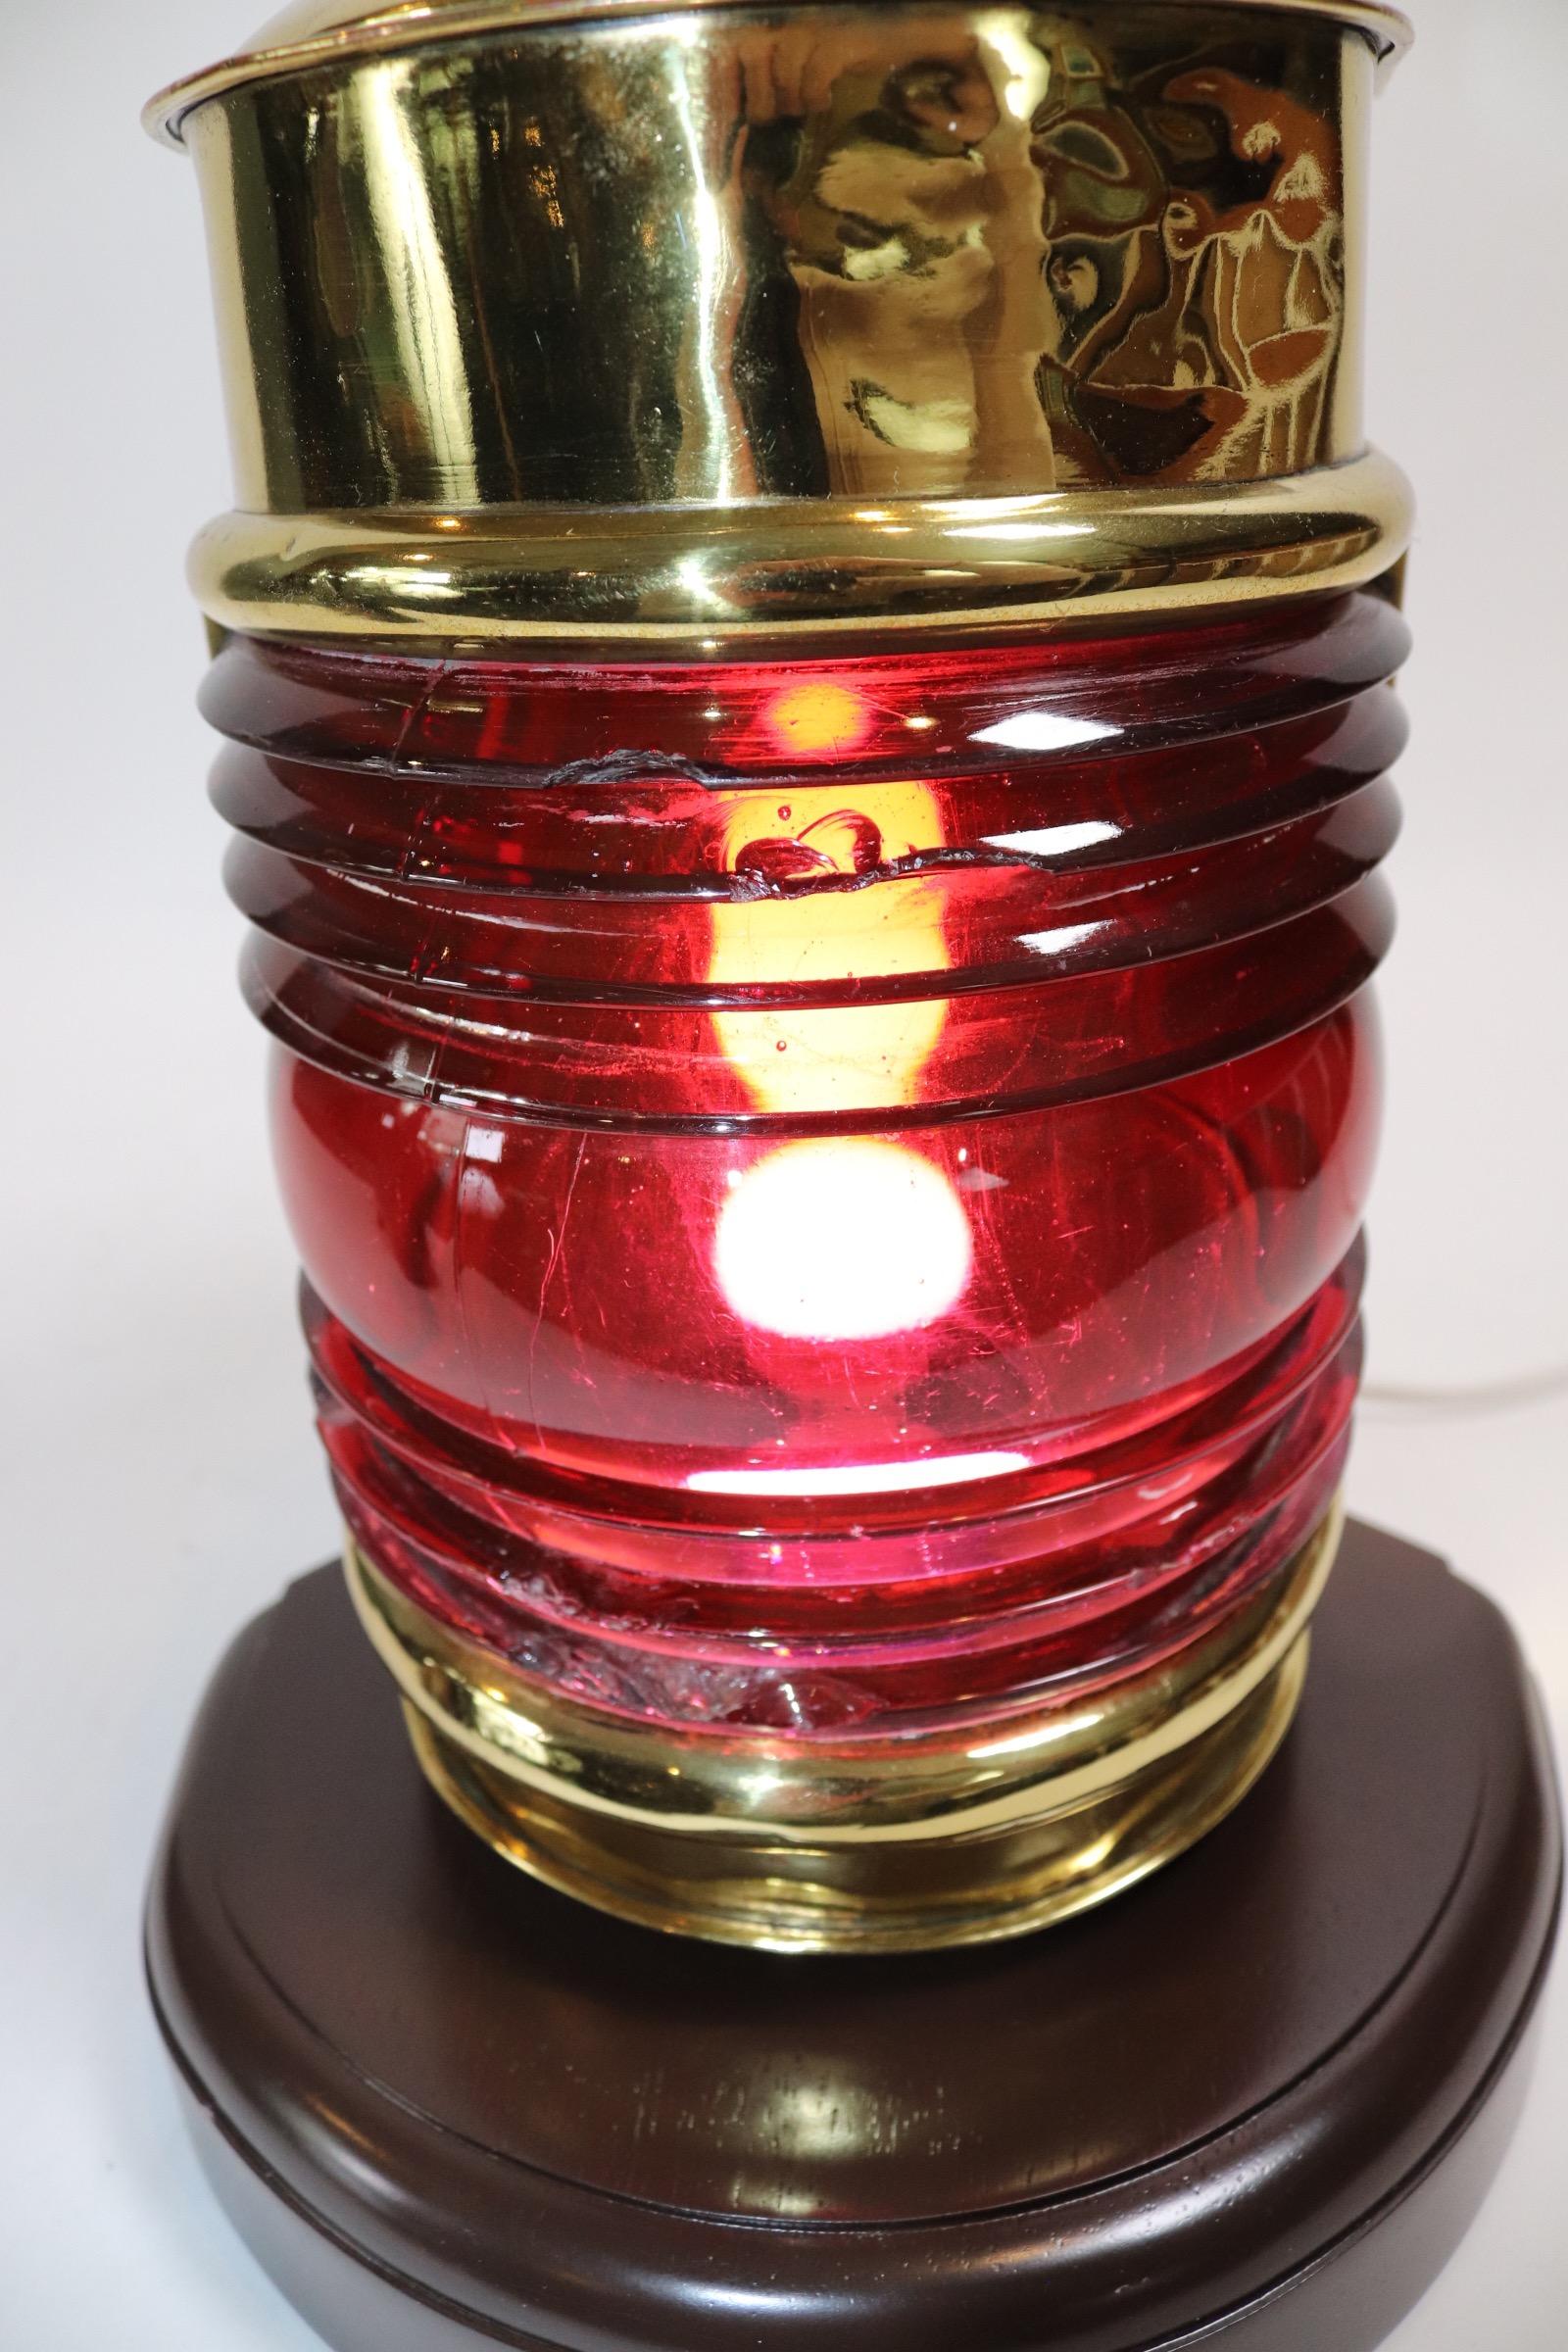 Highly polished and lacquered ships port lantern with Fresnel glass lens, vented top and mounting tabs. Very unusual shape. Mounted to a custom wood base and unit has been electrified for home use. Some chips to lens. Weight is 8 pounds.